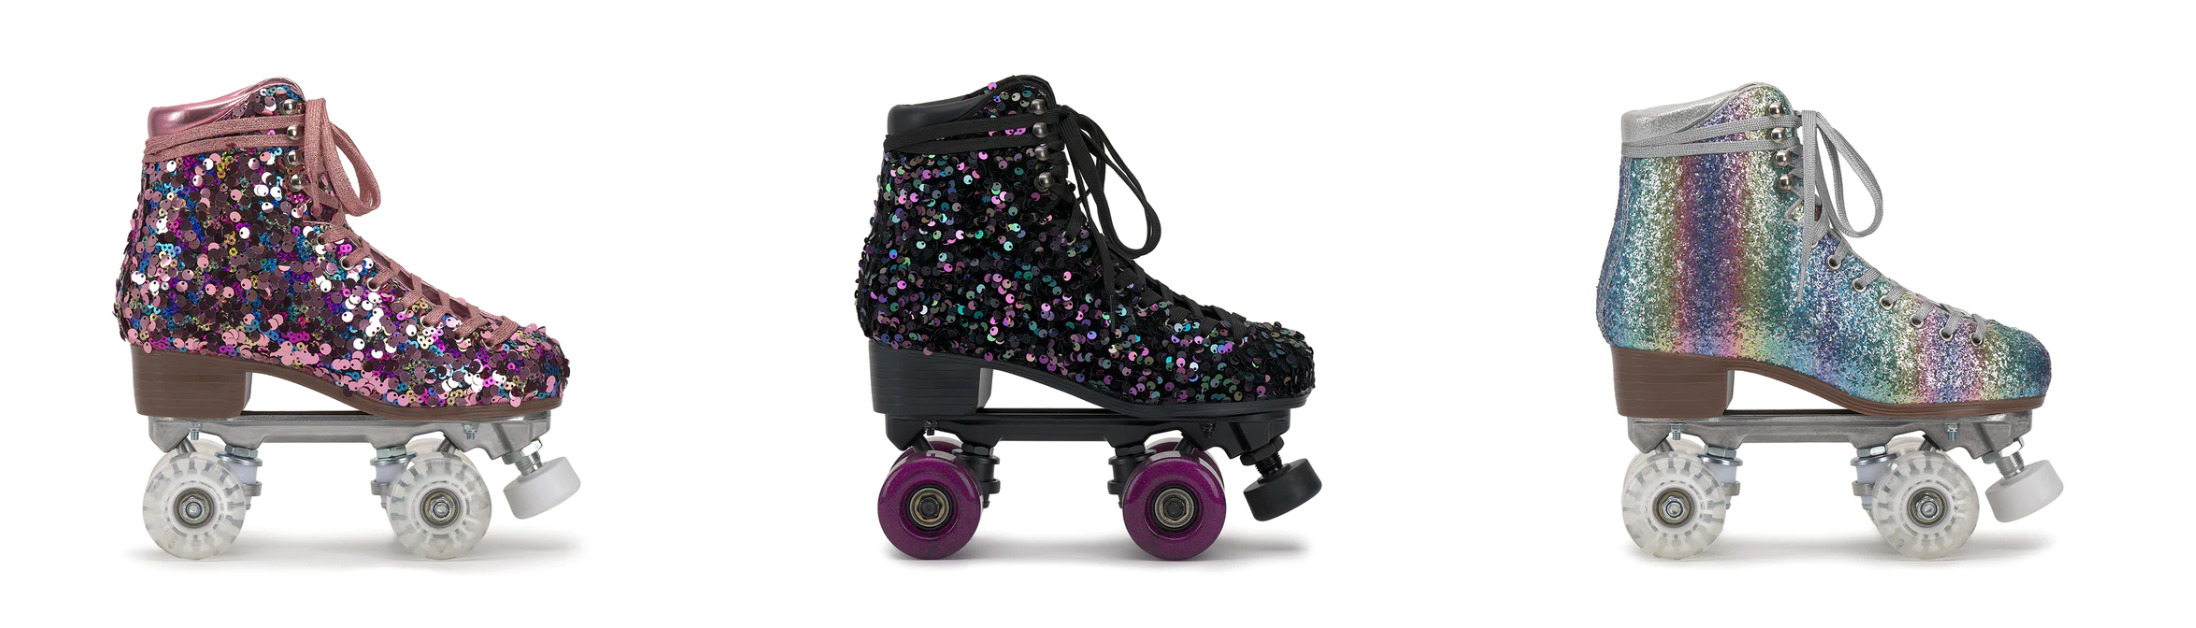 Bedazzled Roller Skates Exist. That Makes Me Happy.